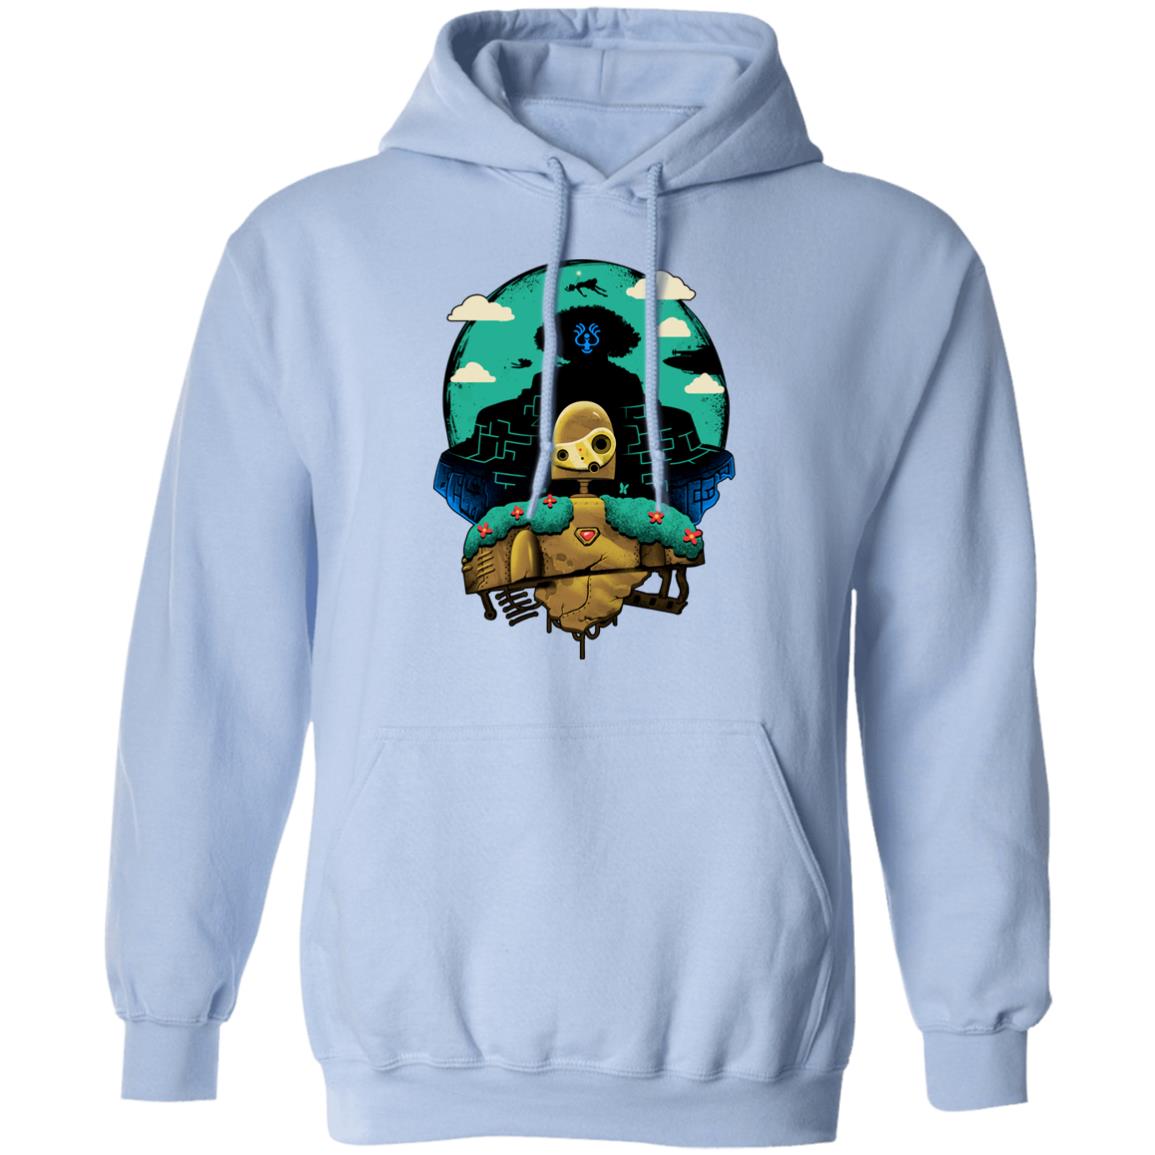 Laputa: Castle in The Sky and Warrior Robot Hoodie